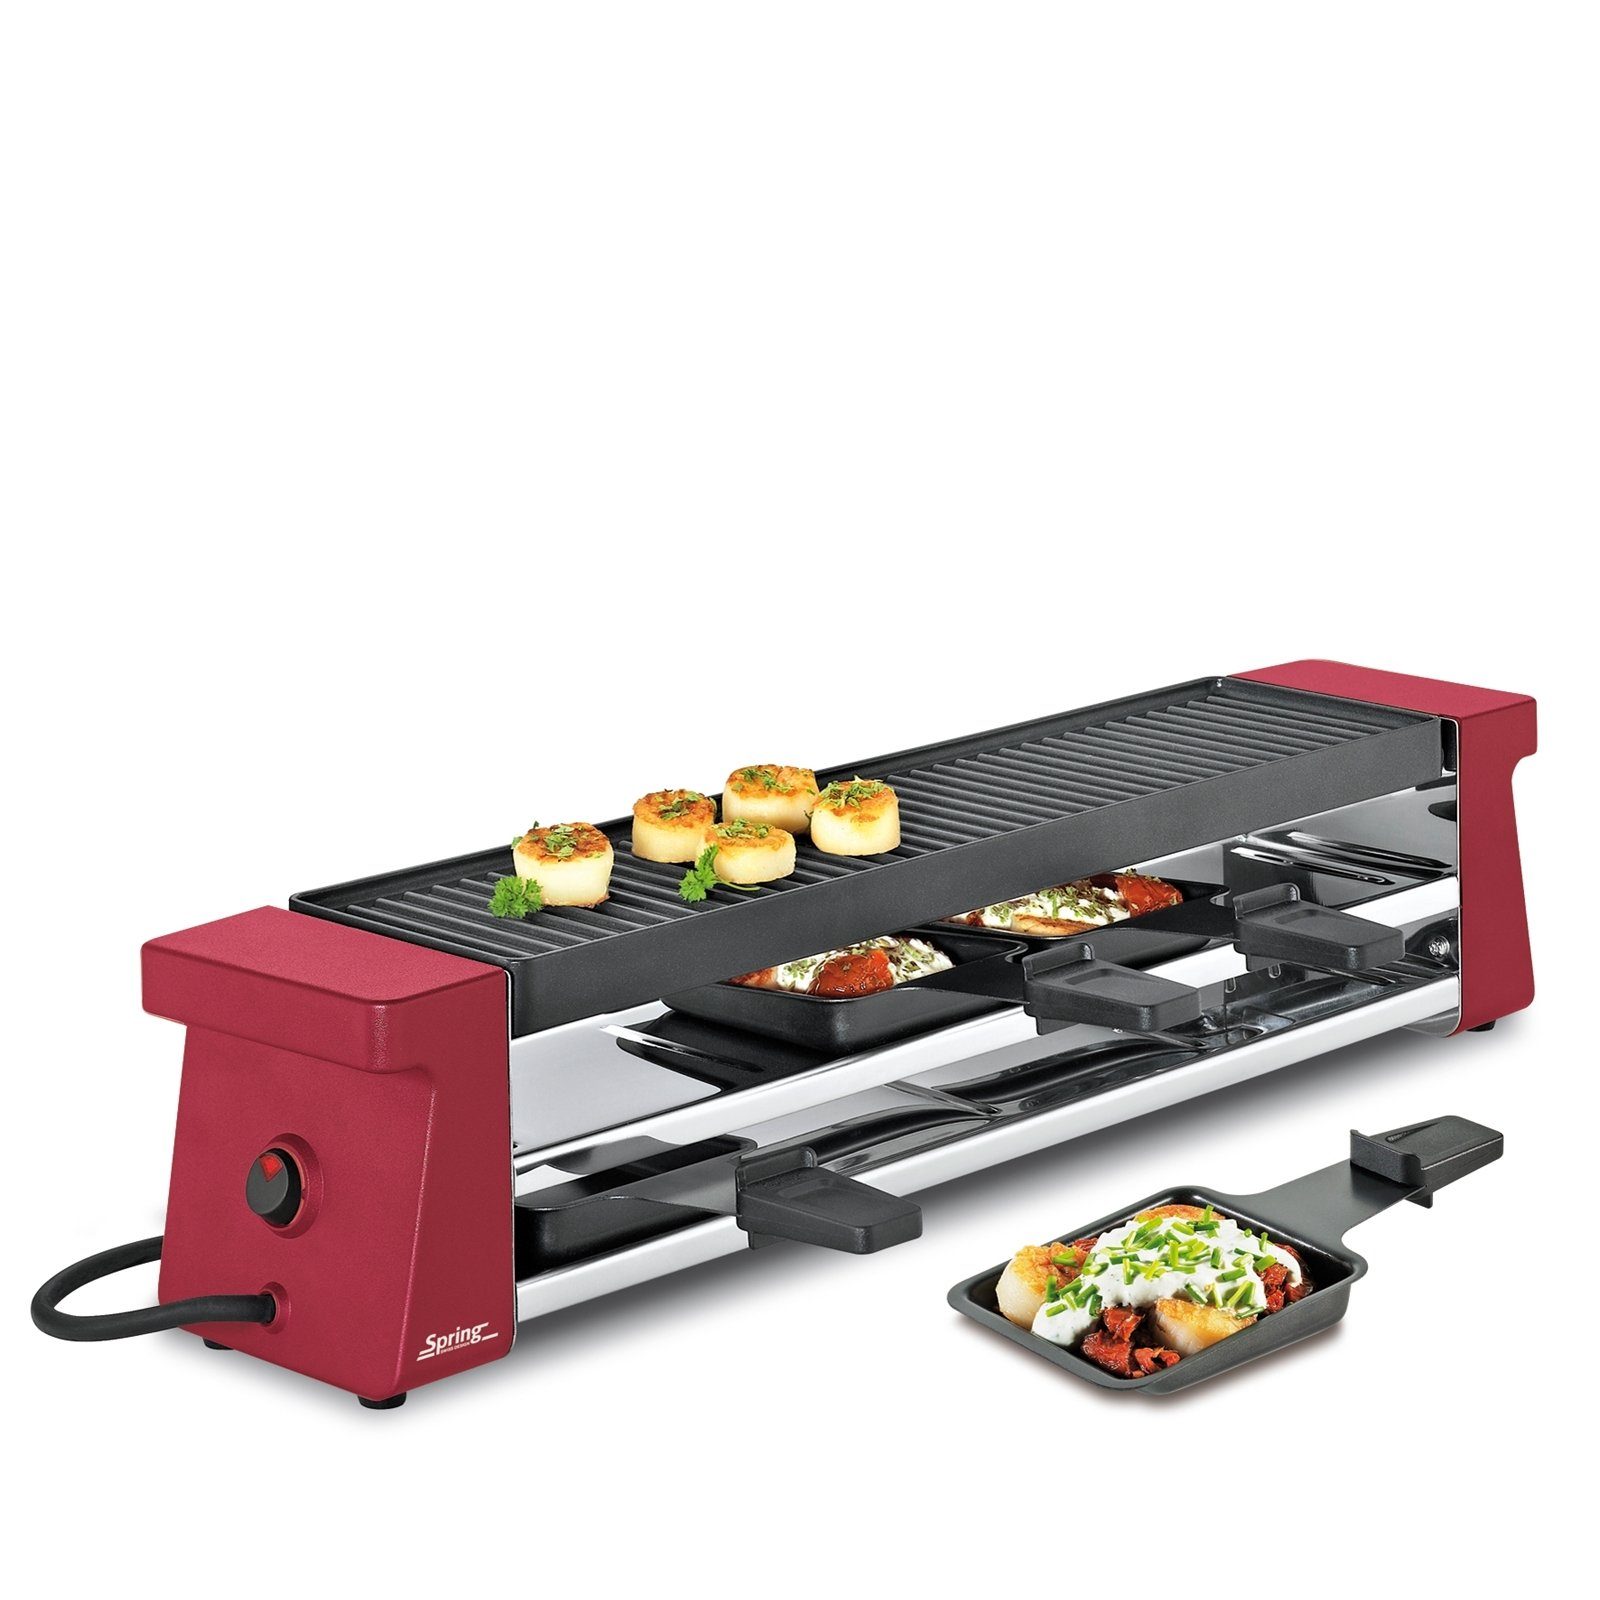 Spring Raclette Raclette 4 Compact Rot